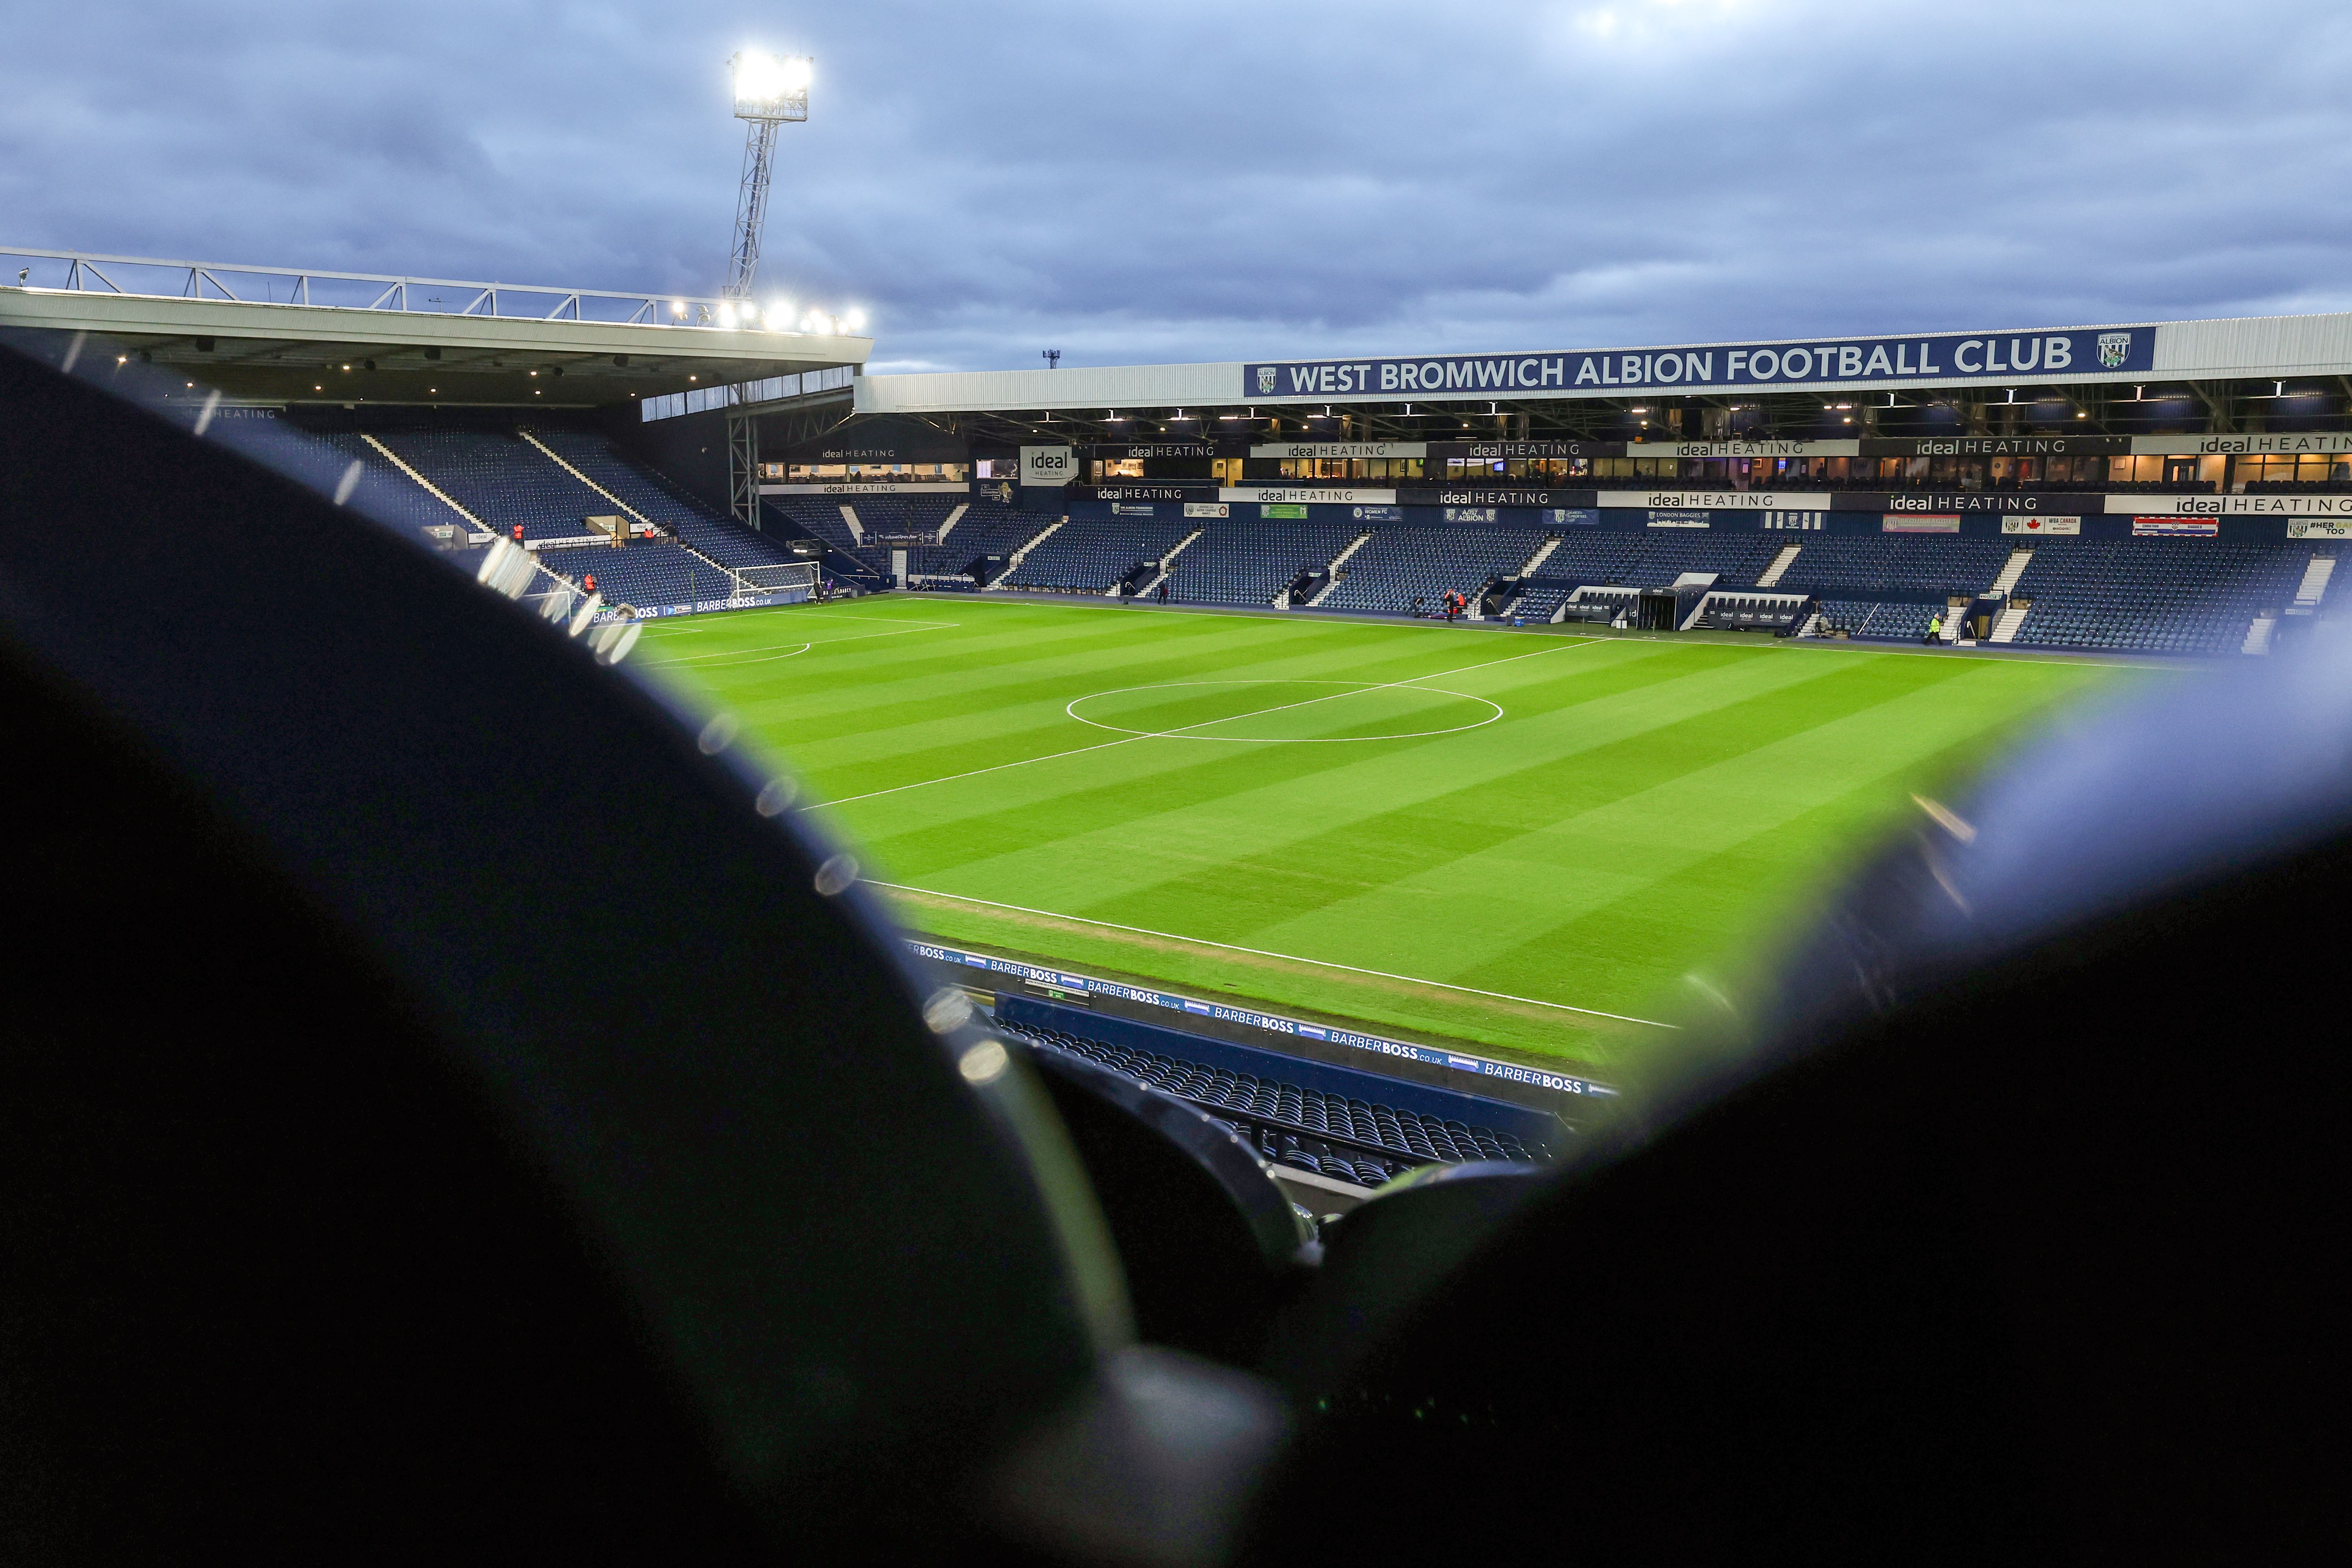 A general view of The Hawthorns from the East Stand looking across to the West Stand